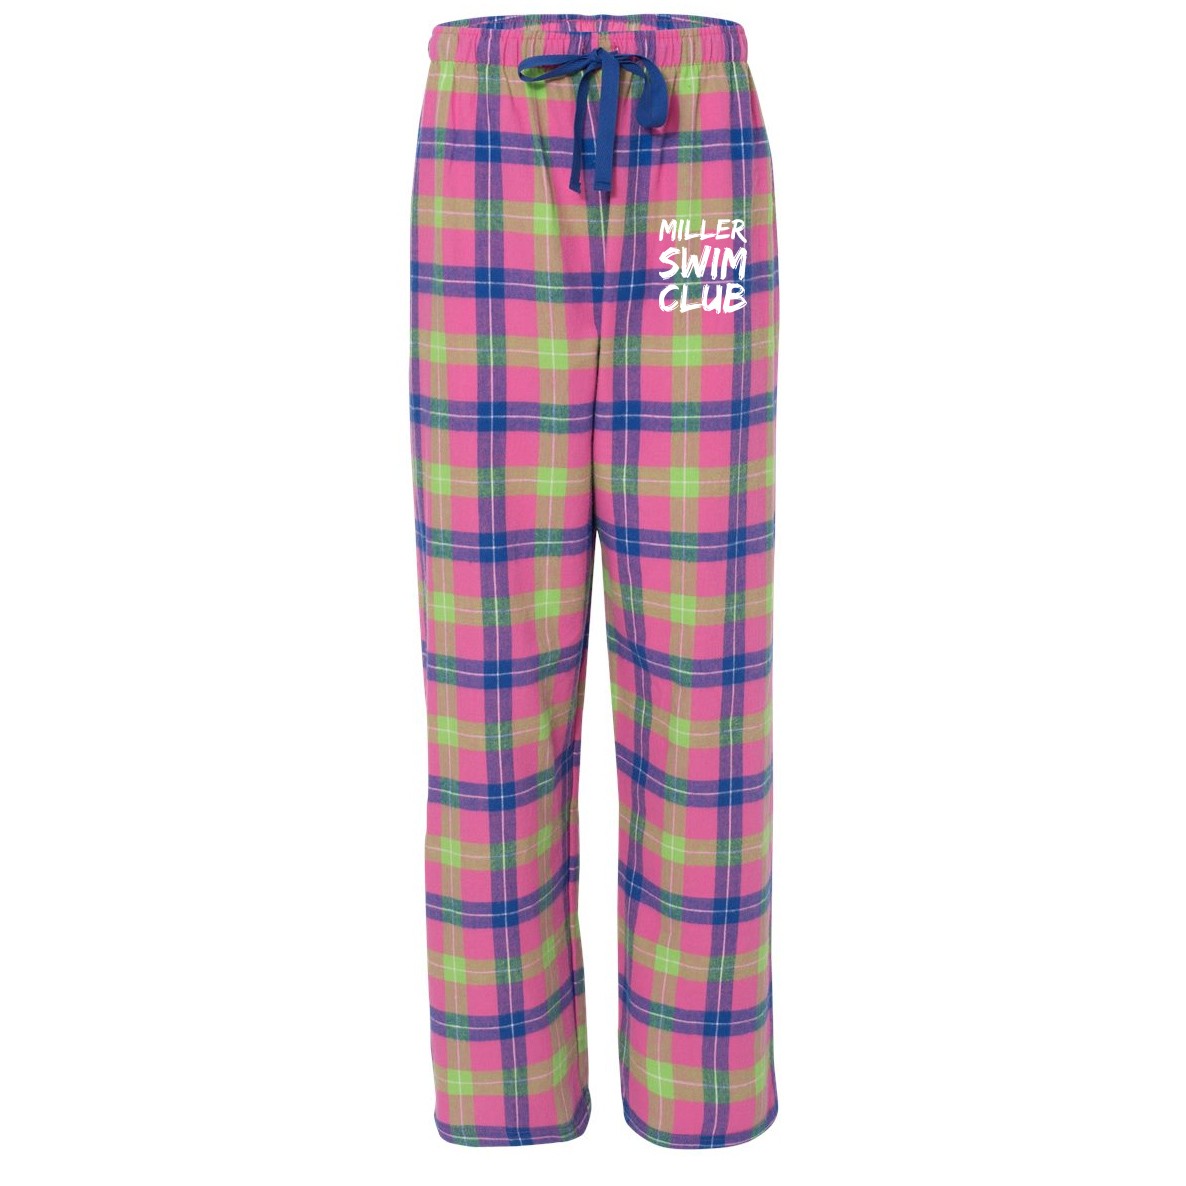 Miller Swim Club 08 Adult and Youth Boxercraft Team Pride Flannel Pant